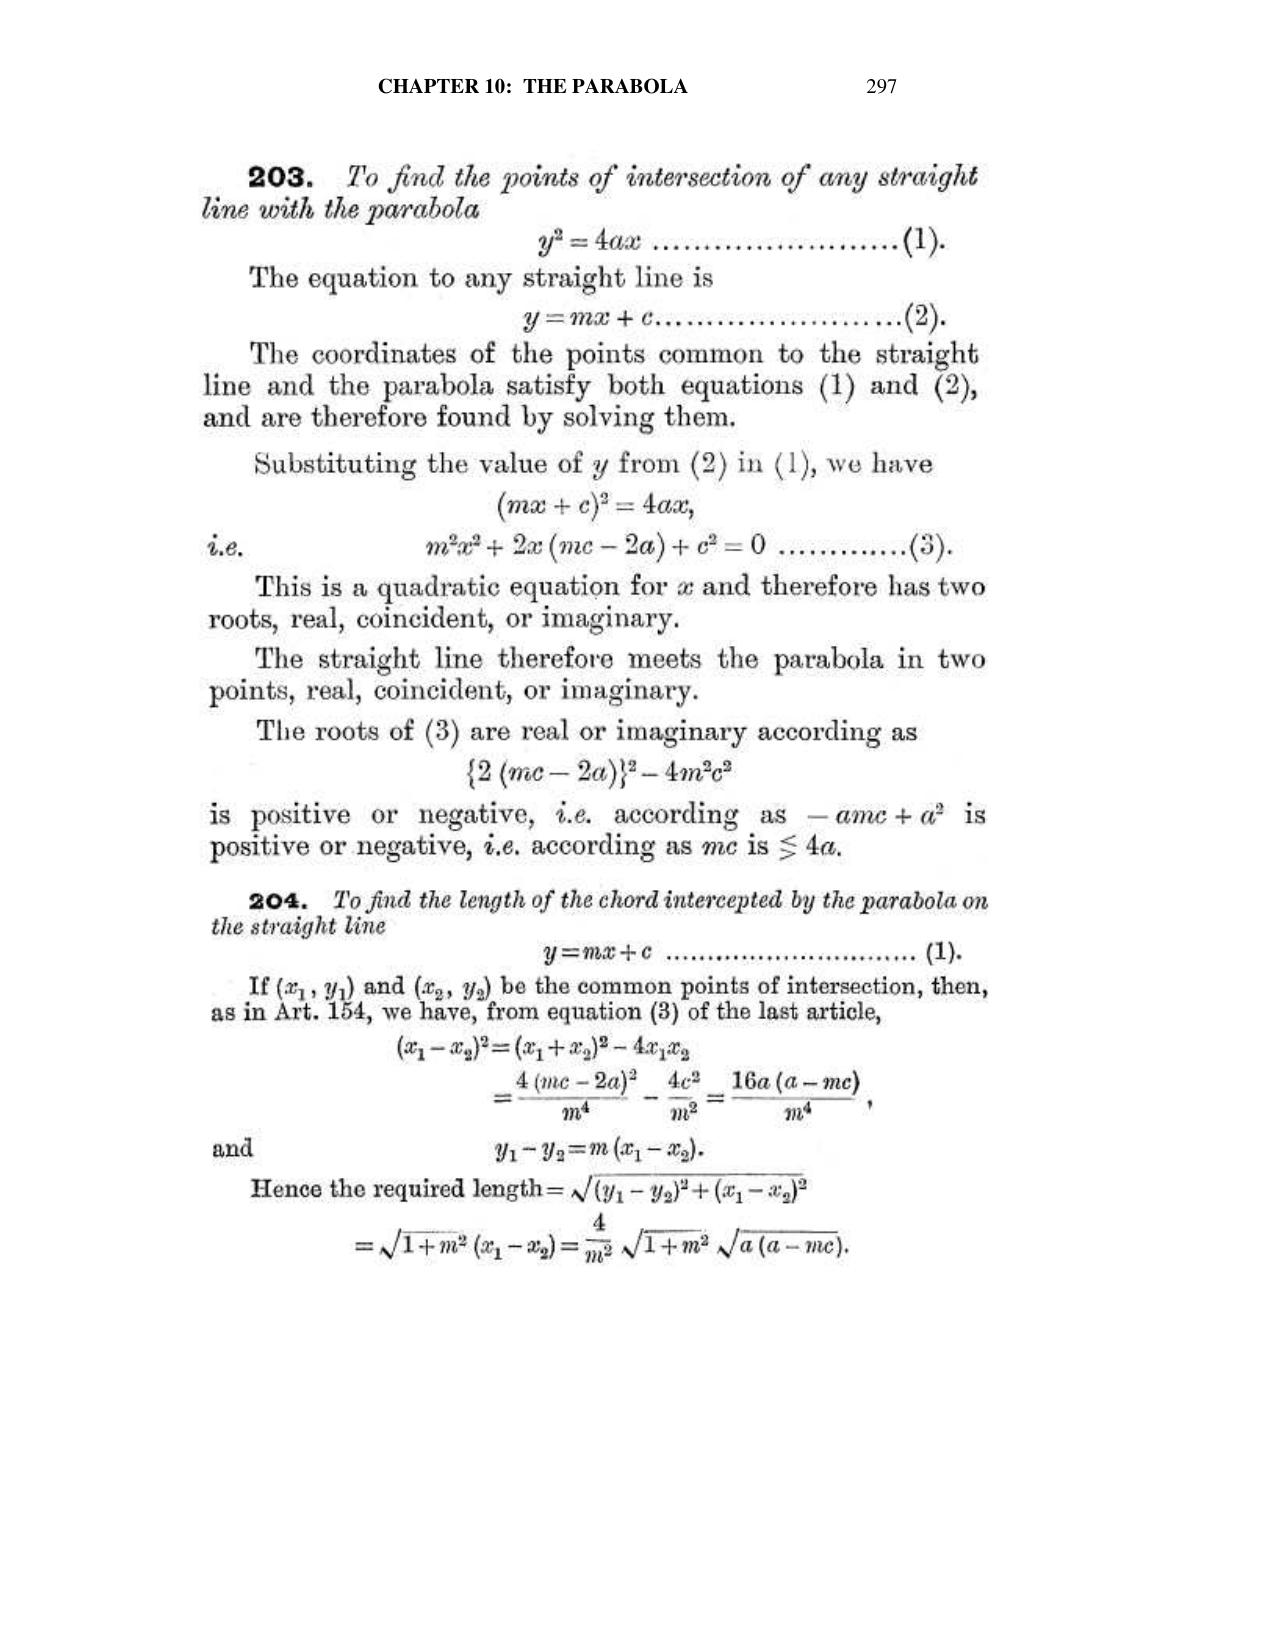 Chapter 10: The Parabola - SL Loney Solutions: The Elements of Coordinate Geometry - Page 11